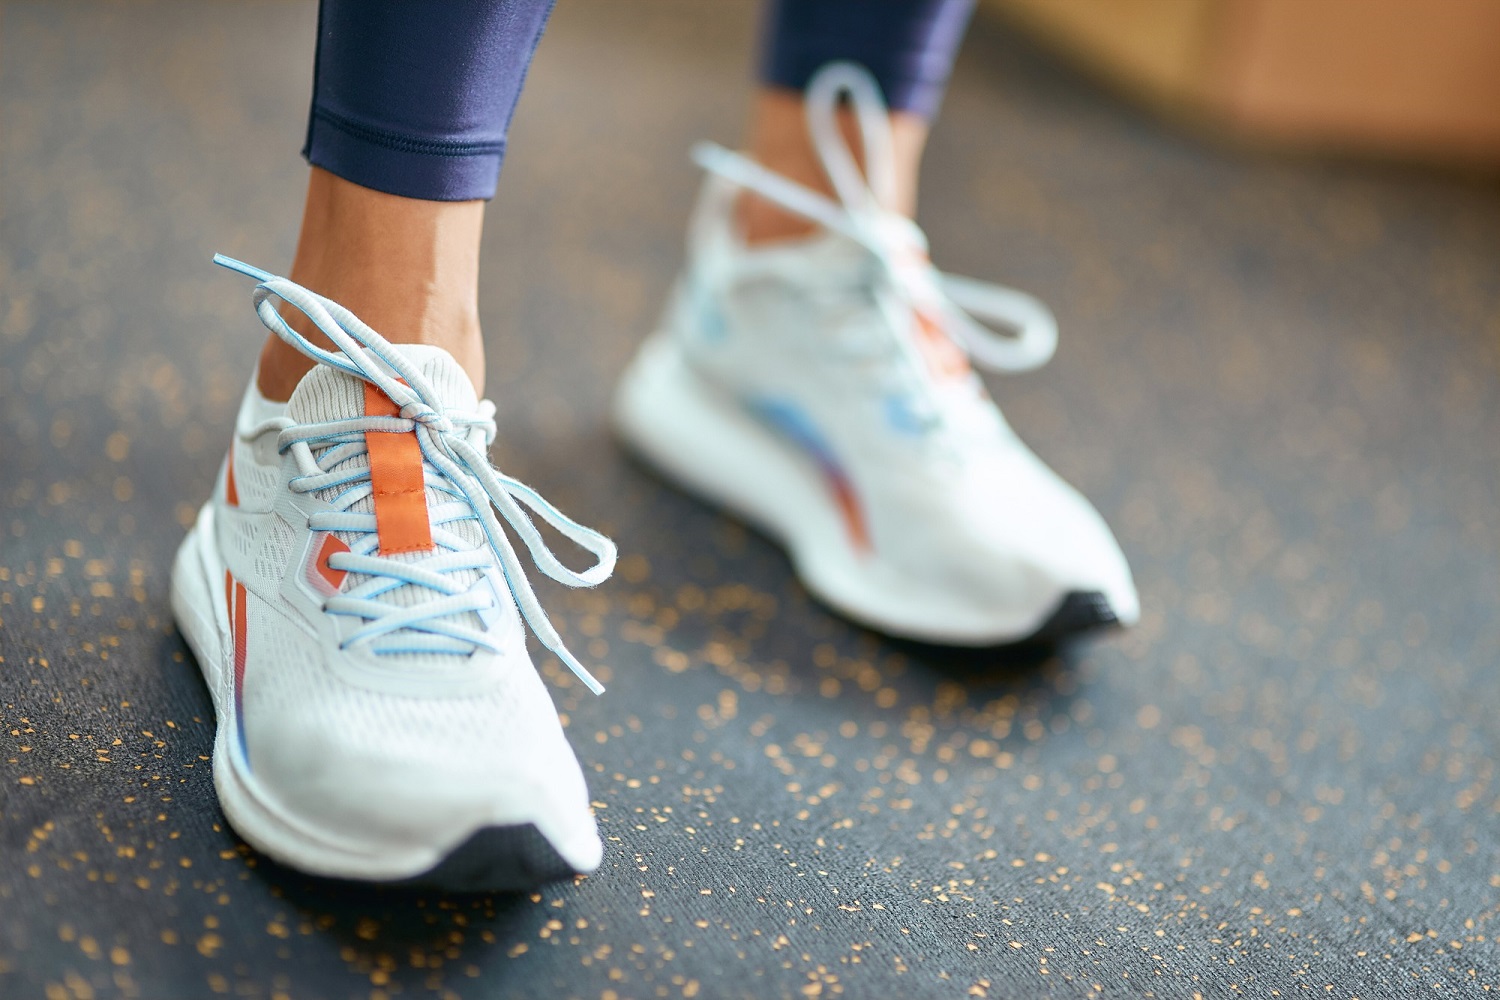 cropped-shot-female-wearing-sport-shoes-sneakers-standing-gym-workout-training-healthy-active-lifestyle-concept_386167-2979